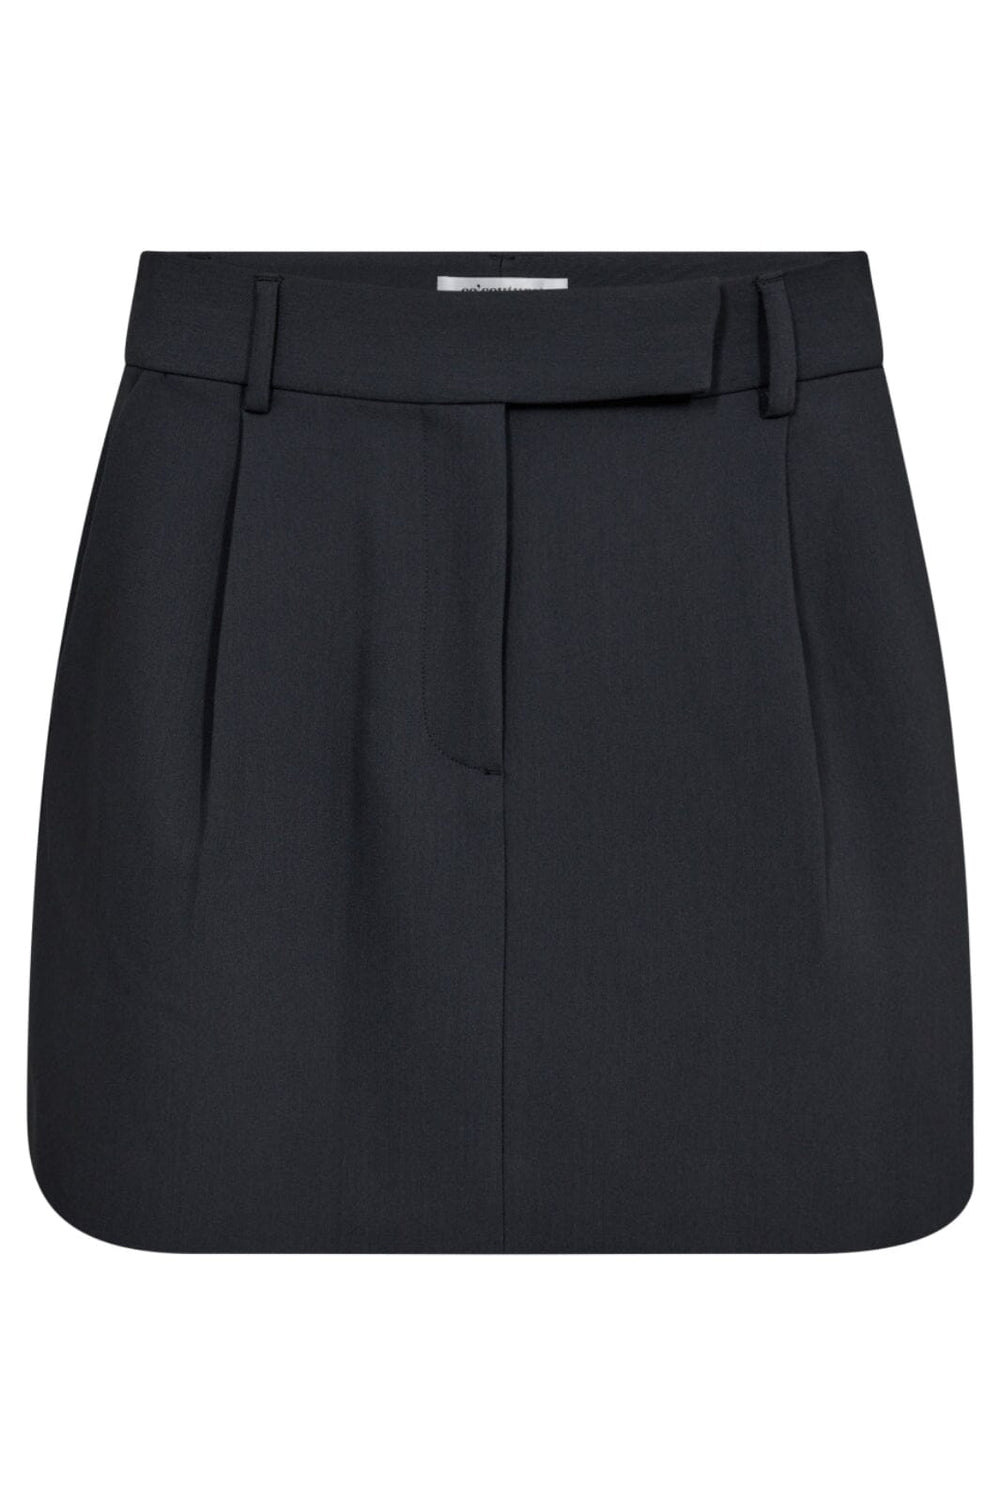 Co´couture - Volacc Crop Pleat Skirt 34105 - 61 Ink Nederdele 